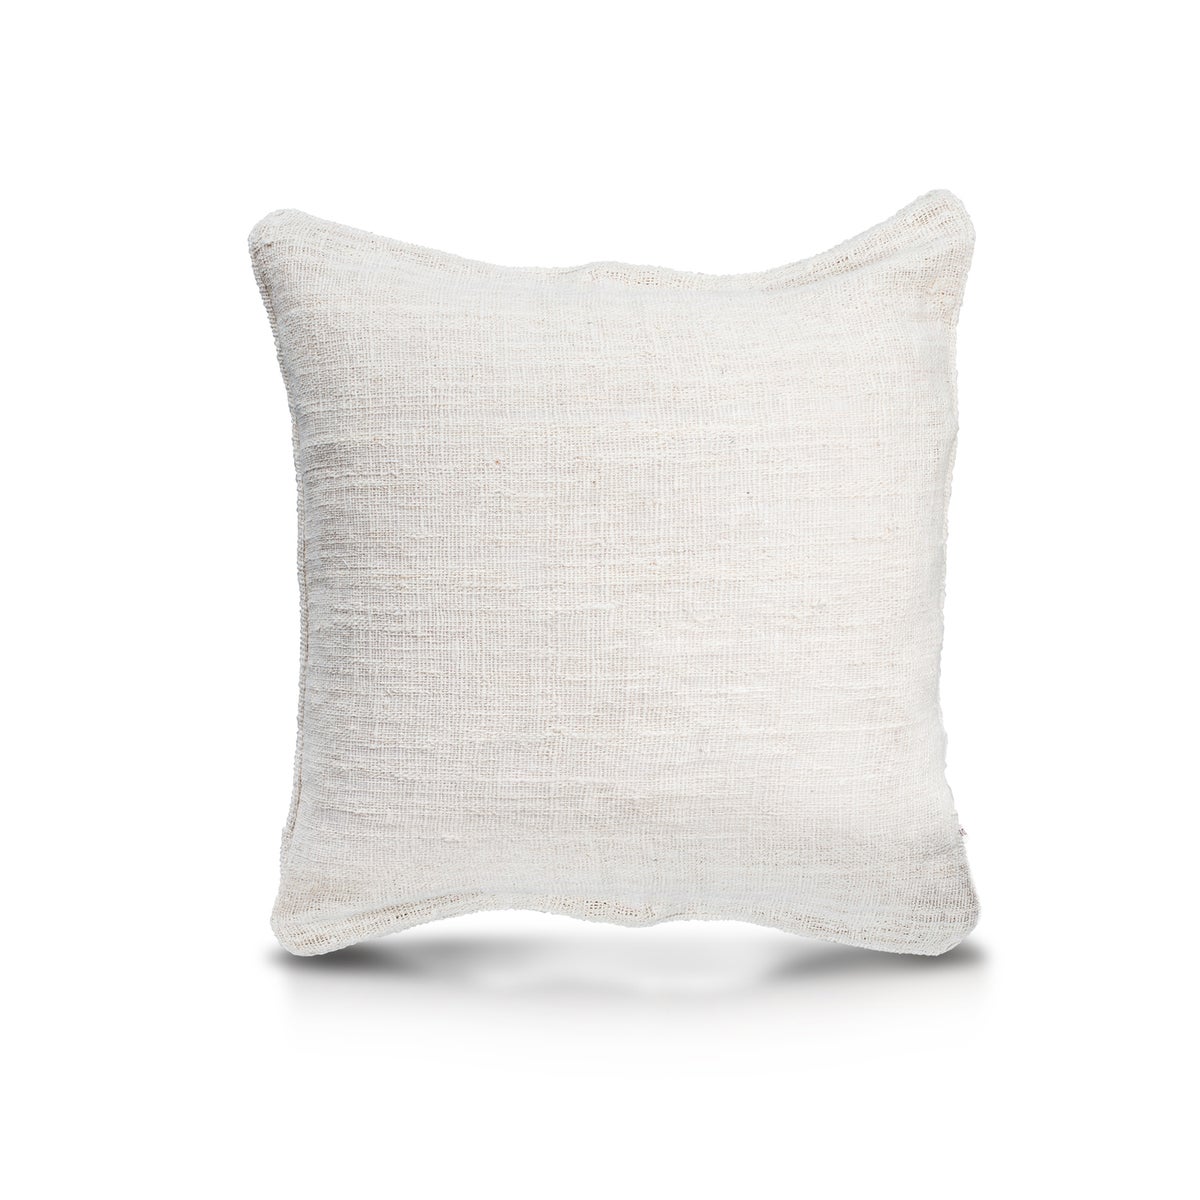 Pillow, 24" with Piping - Solid (Natural)